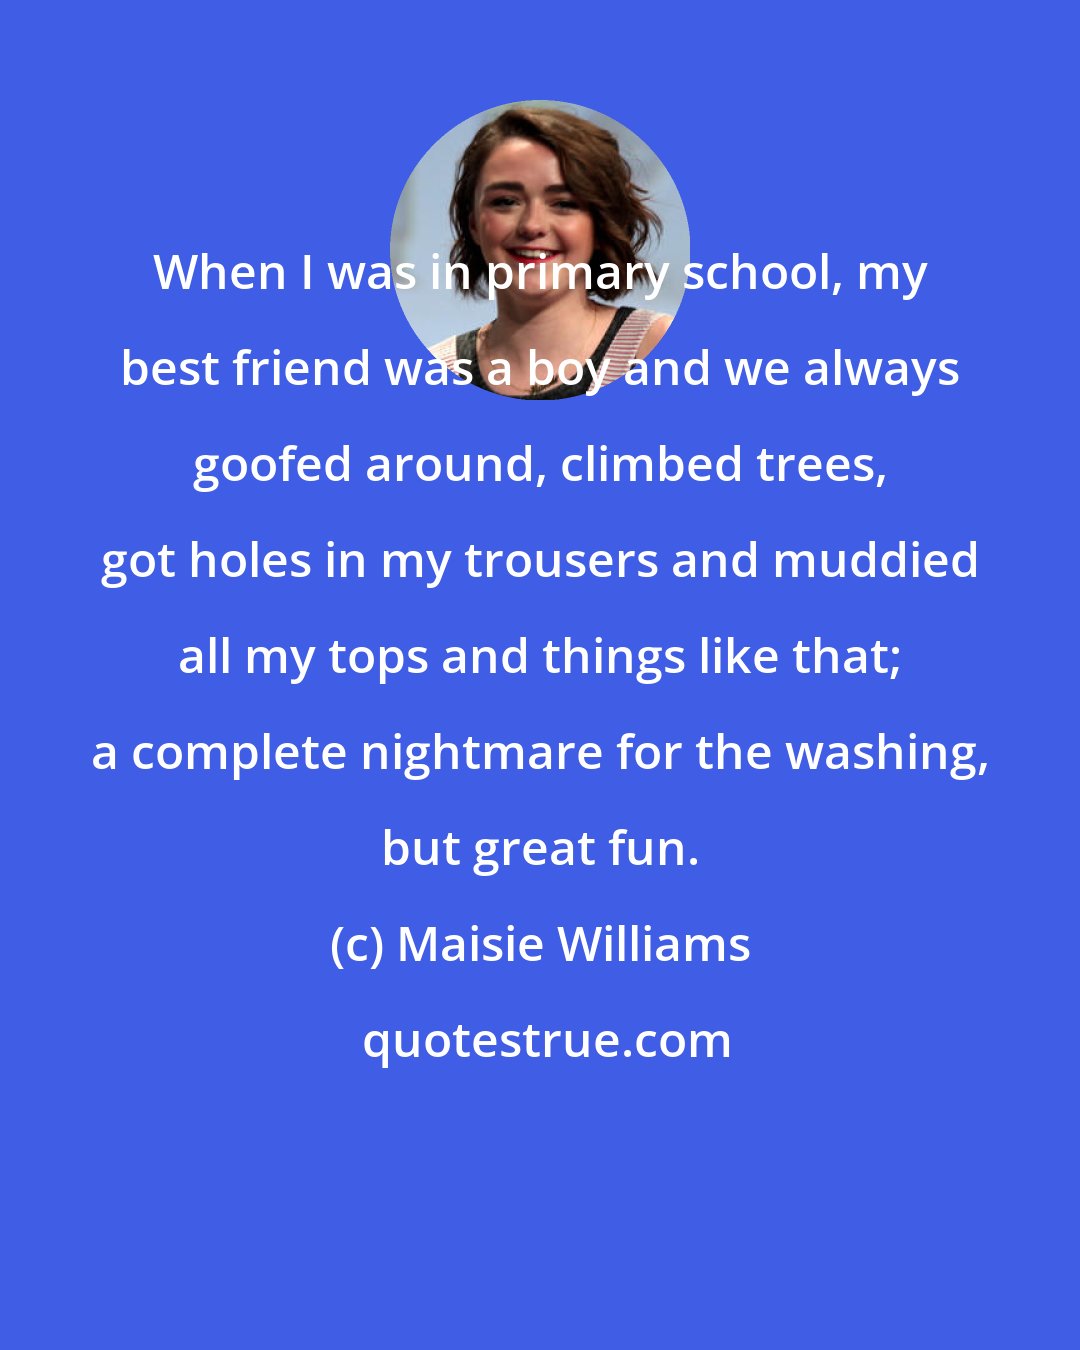 Maisie Williams: When I was in primary school, my best friend was a boy and we always goofed around, climbed trees, got holes in my trousers and muddied all my tops and things like that; a complete nightmare for the washing, but great fun.